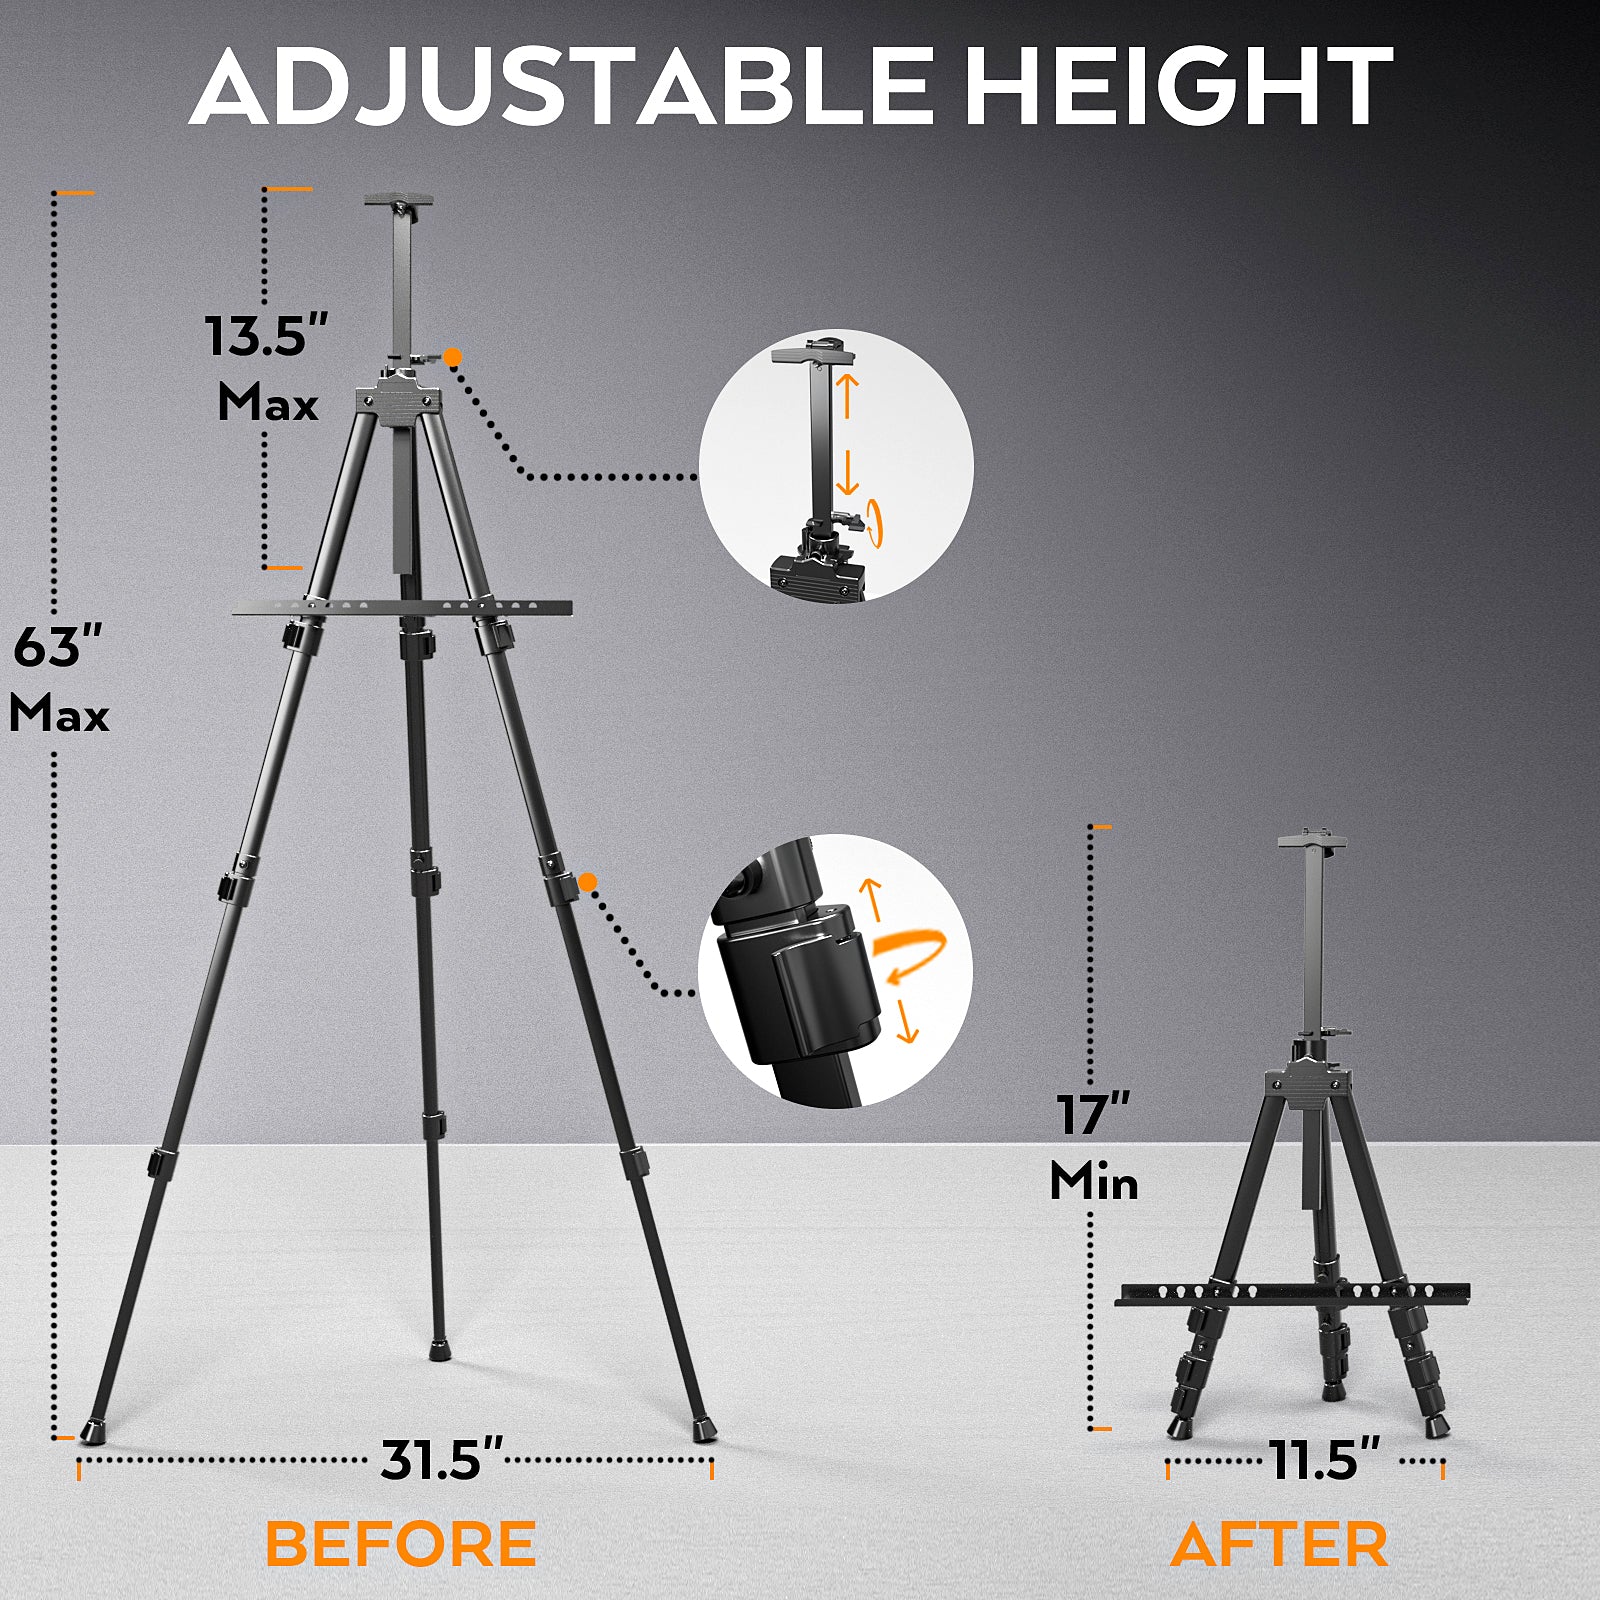 Nicpro 2 Pack Artist Easel Stand, Adjustable Height 17" to 63" Aluminum Metal Tripod Easel for Table Top & Floor, Painting Easel for Display, Posters, Signs Artwork & Trade Exhibitions with Bag- Black